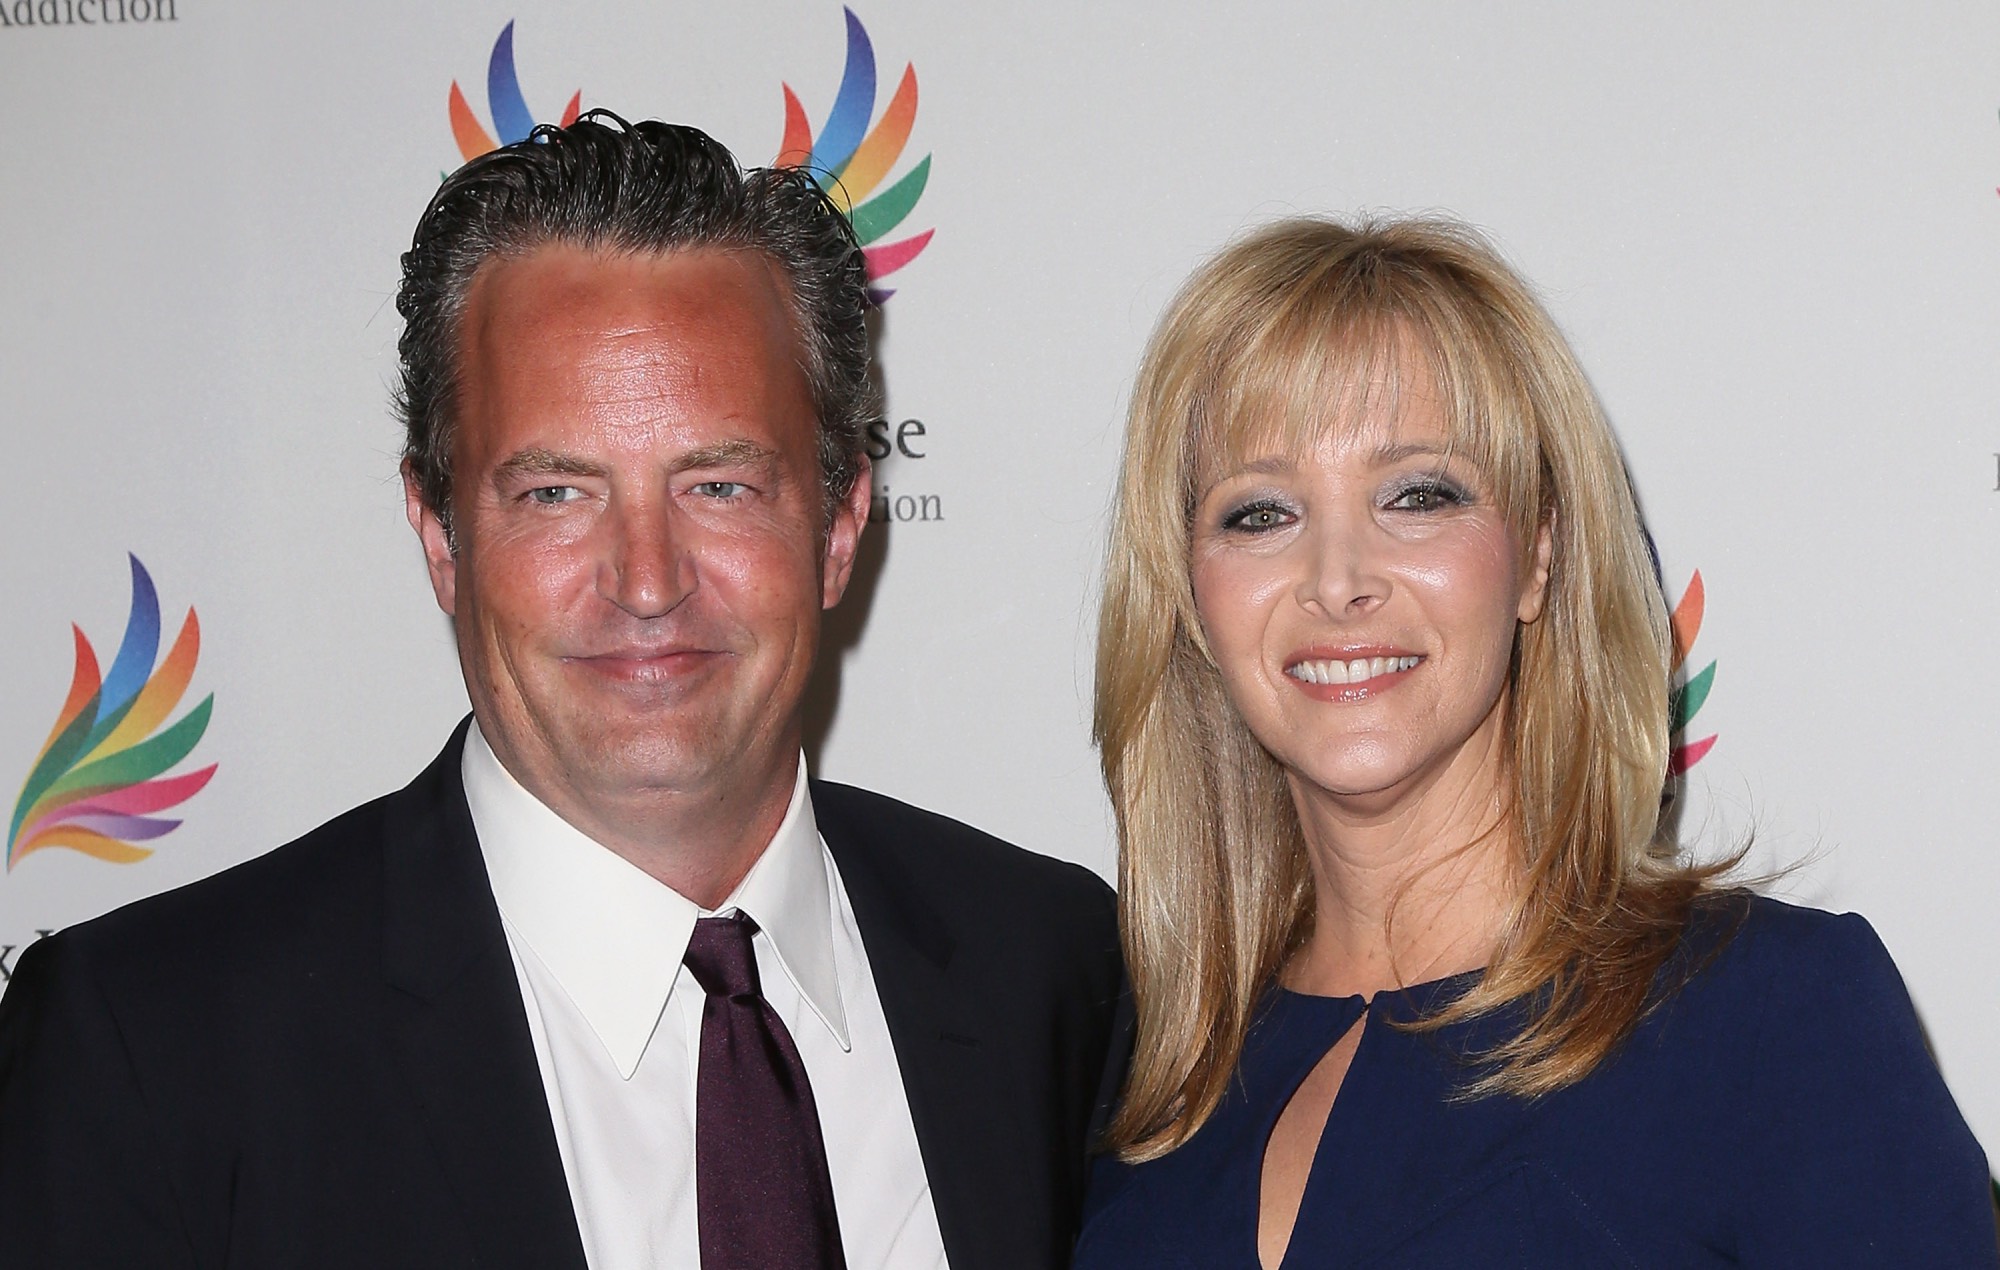 Lisa Kudrow pays tribute to Matthew Perry in endearing Instagram post